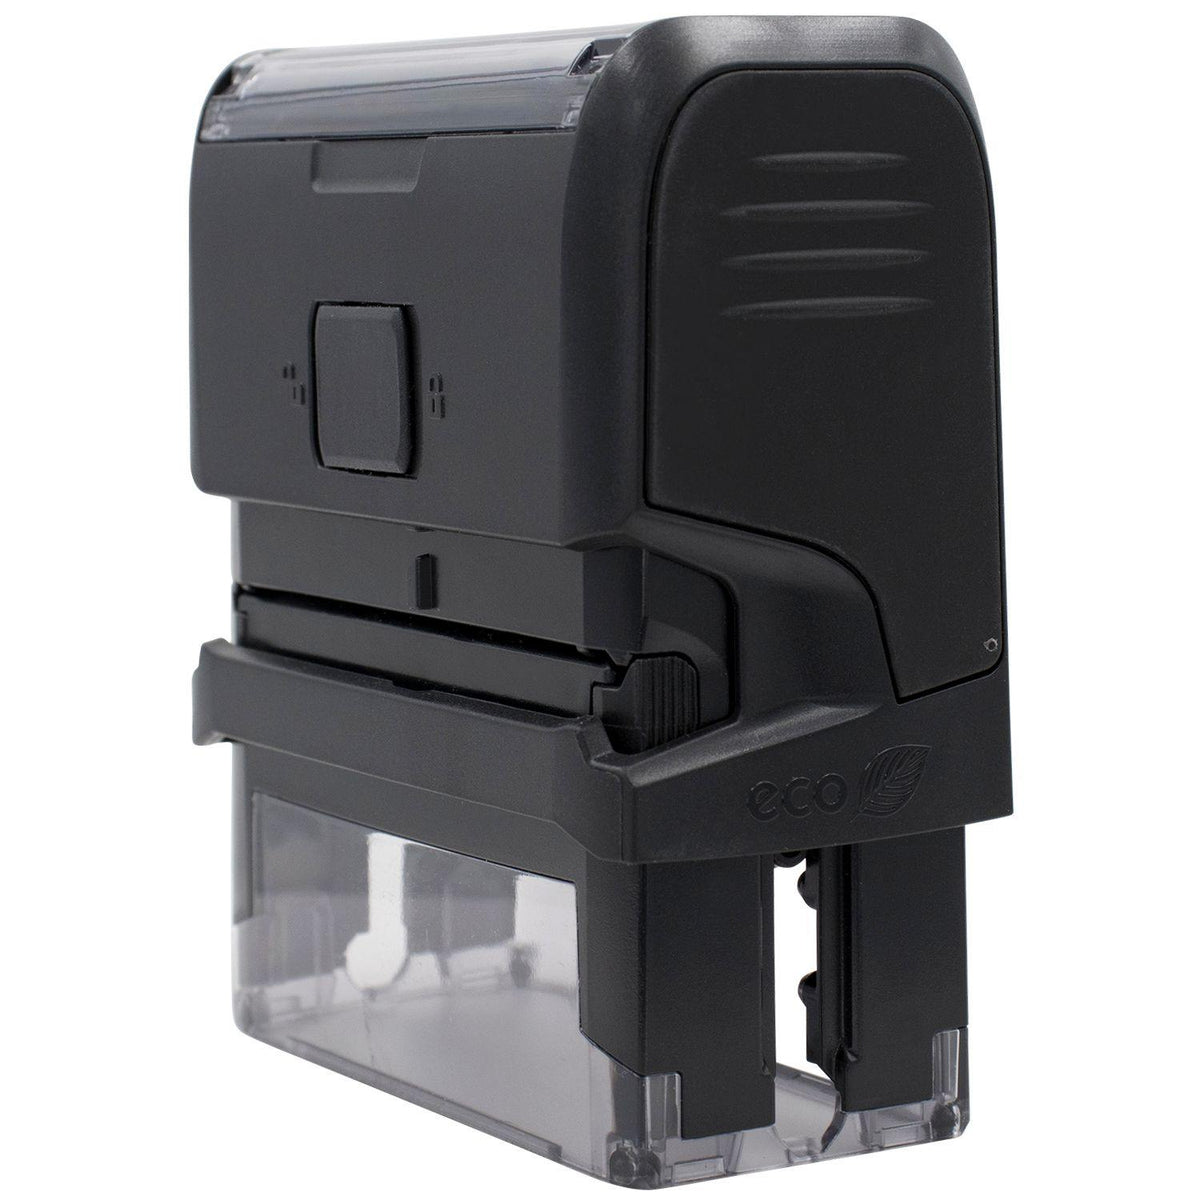 Self-Inking Entered On Stamp - Engineer Seal Stamps - Brand_Trodat, Impression Size_Small, Stamp Type_Self-Inking Stamp